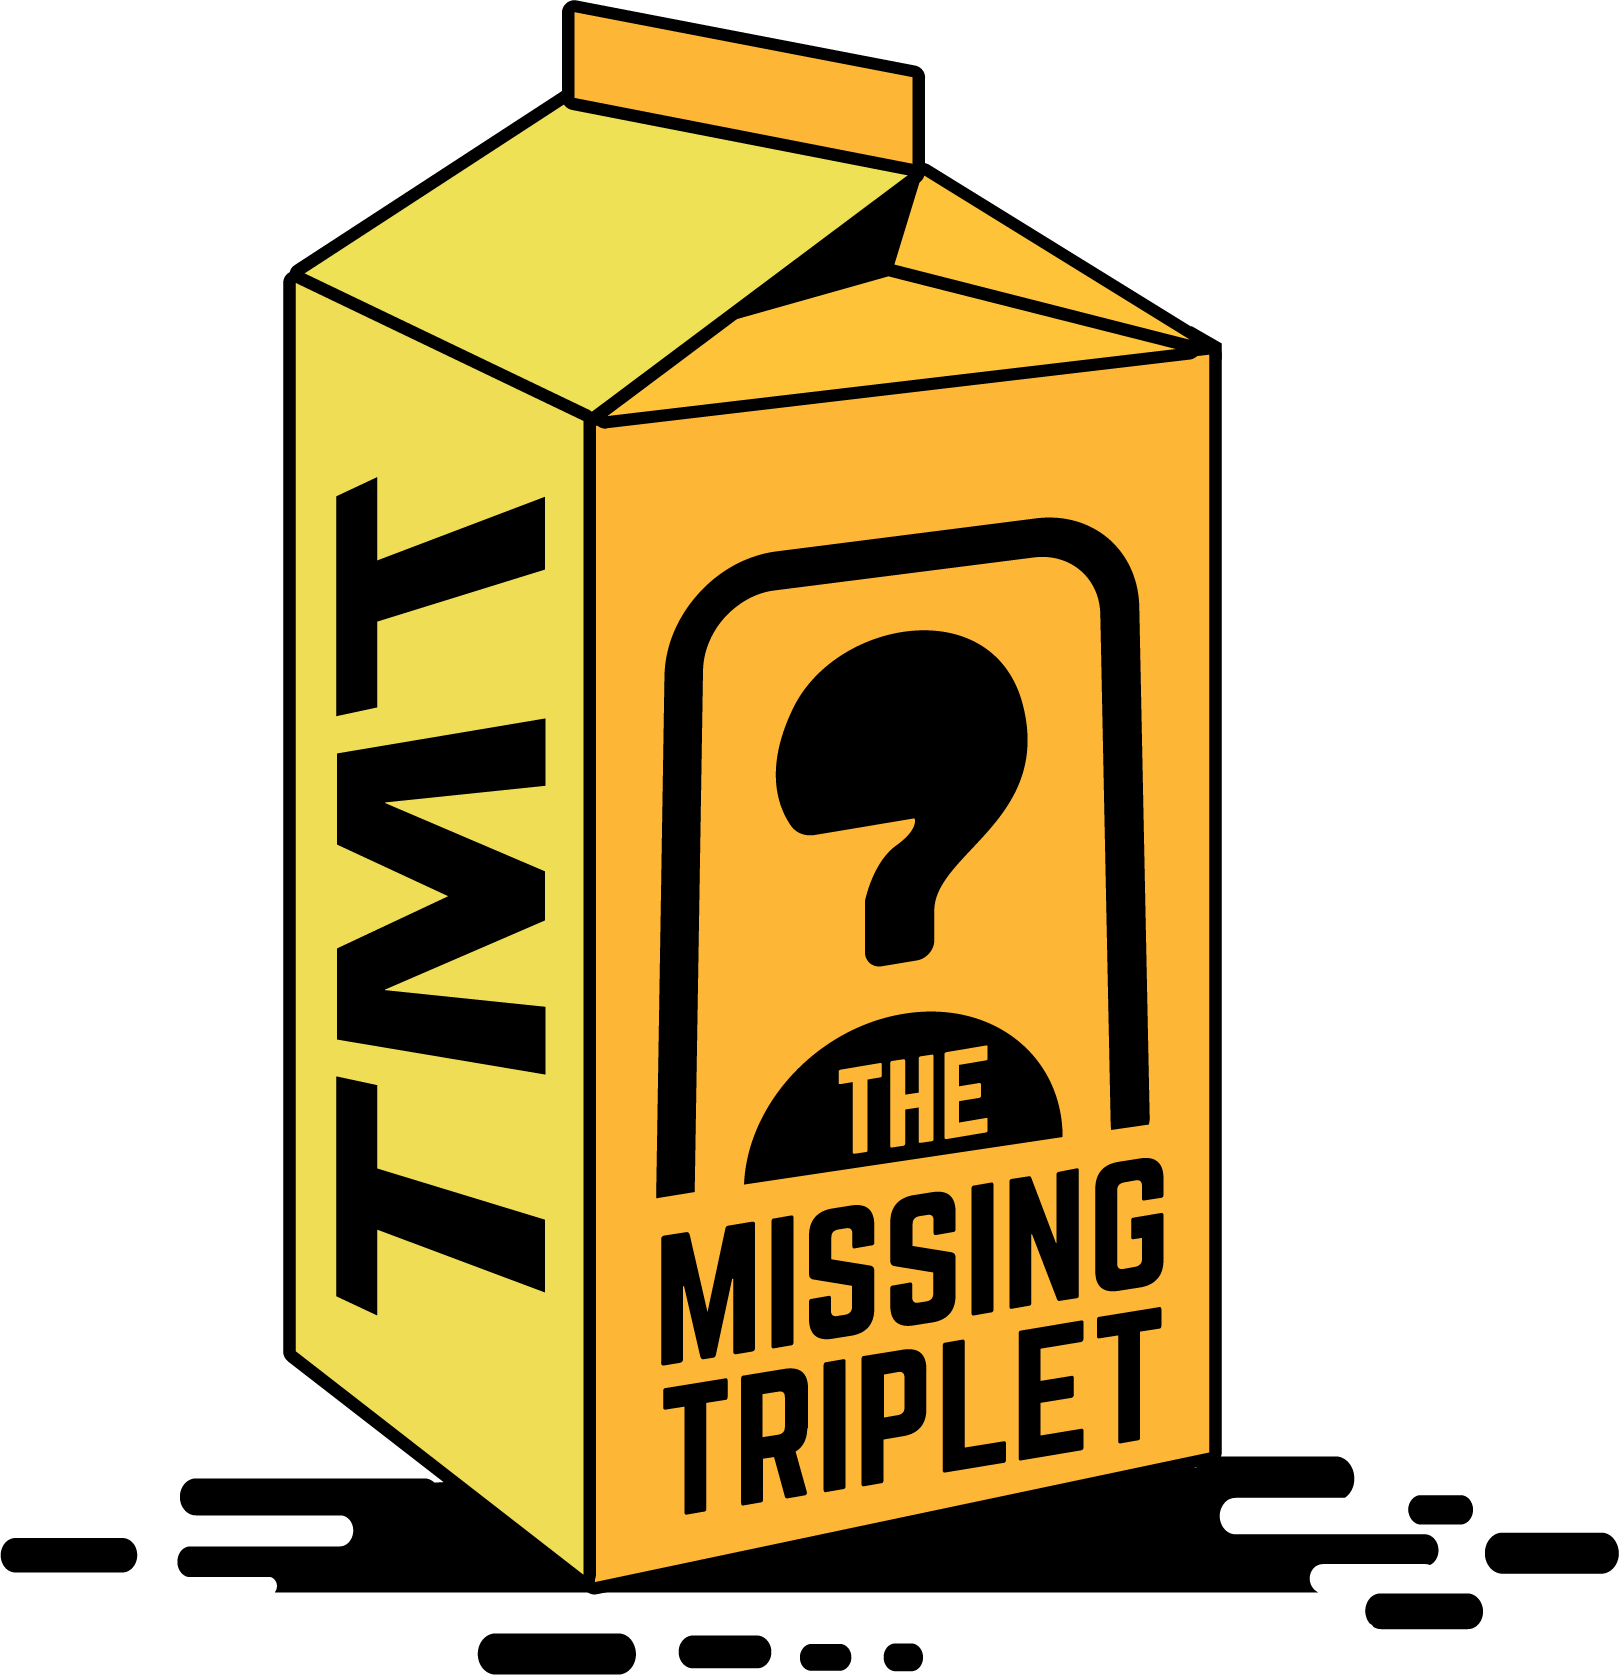 THE MISSING TRIPLET